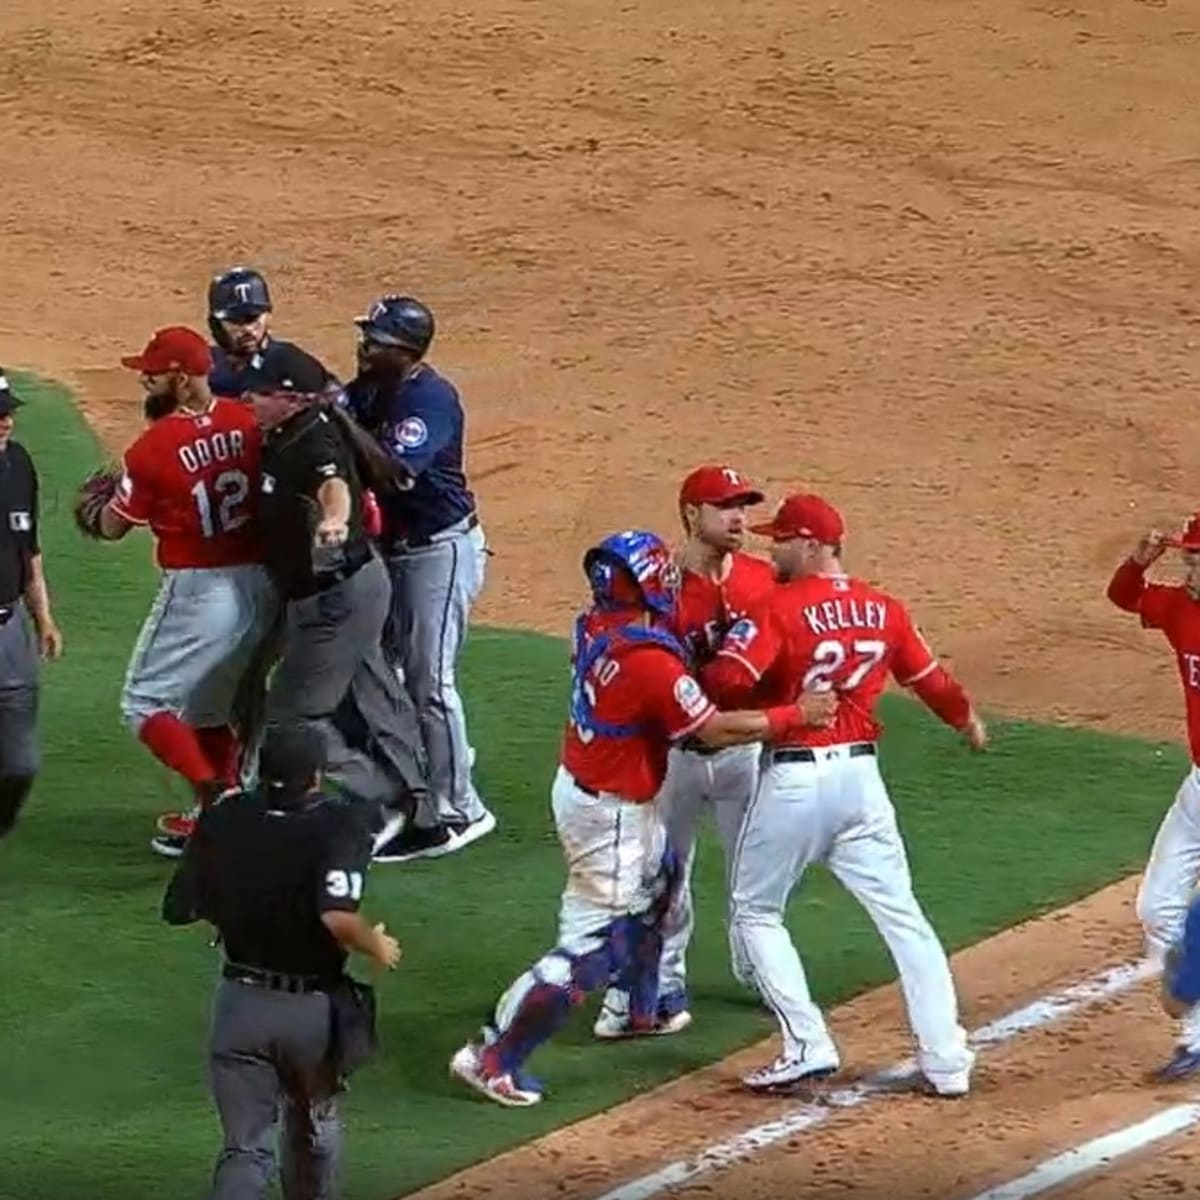 Benches clear after Rangers' Shawn Kelley, Twins' Marwin Gonzalez